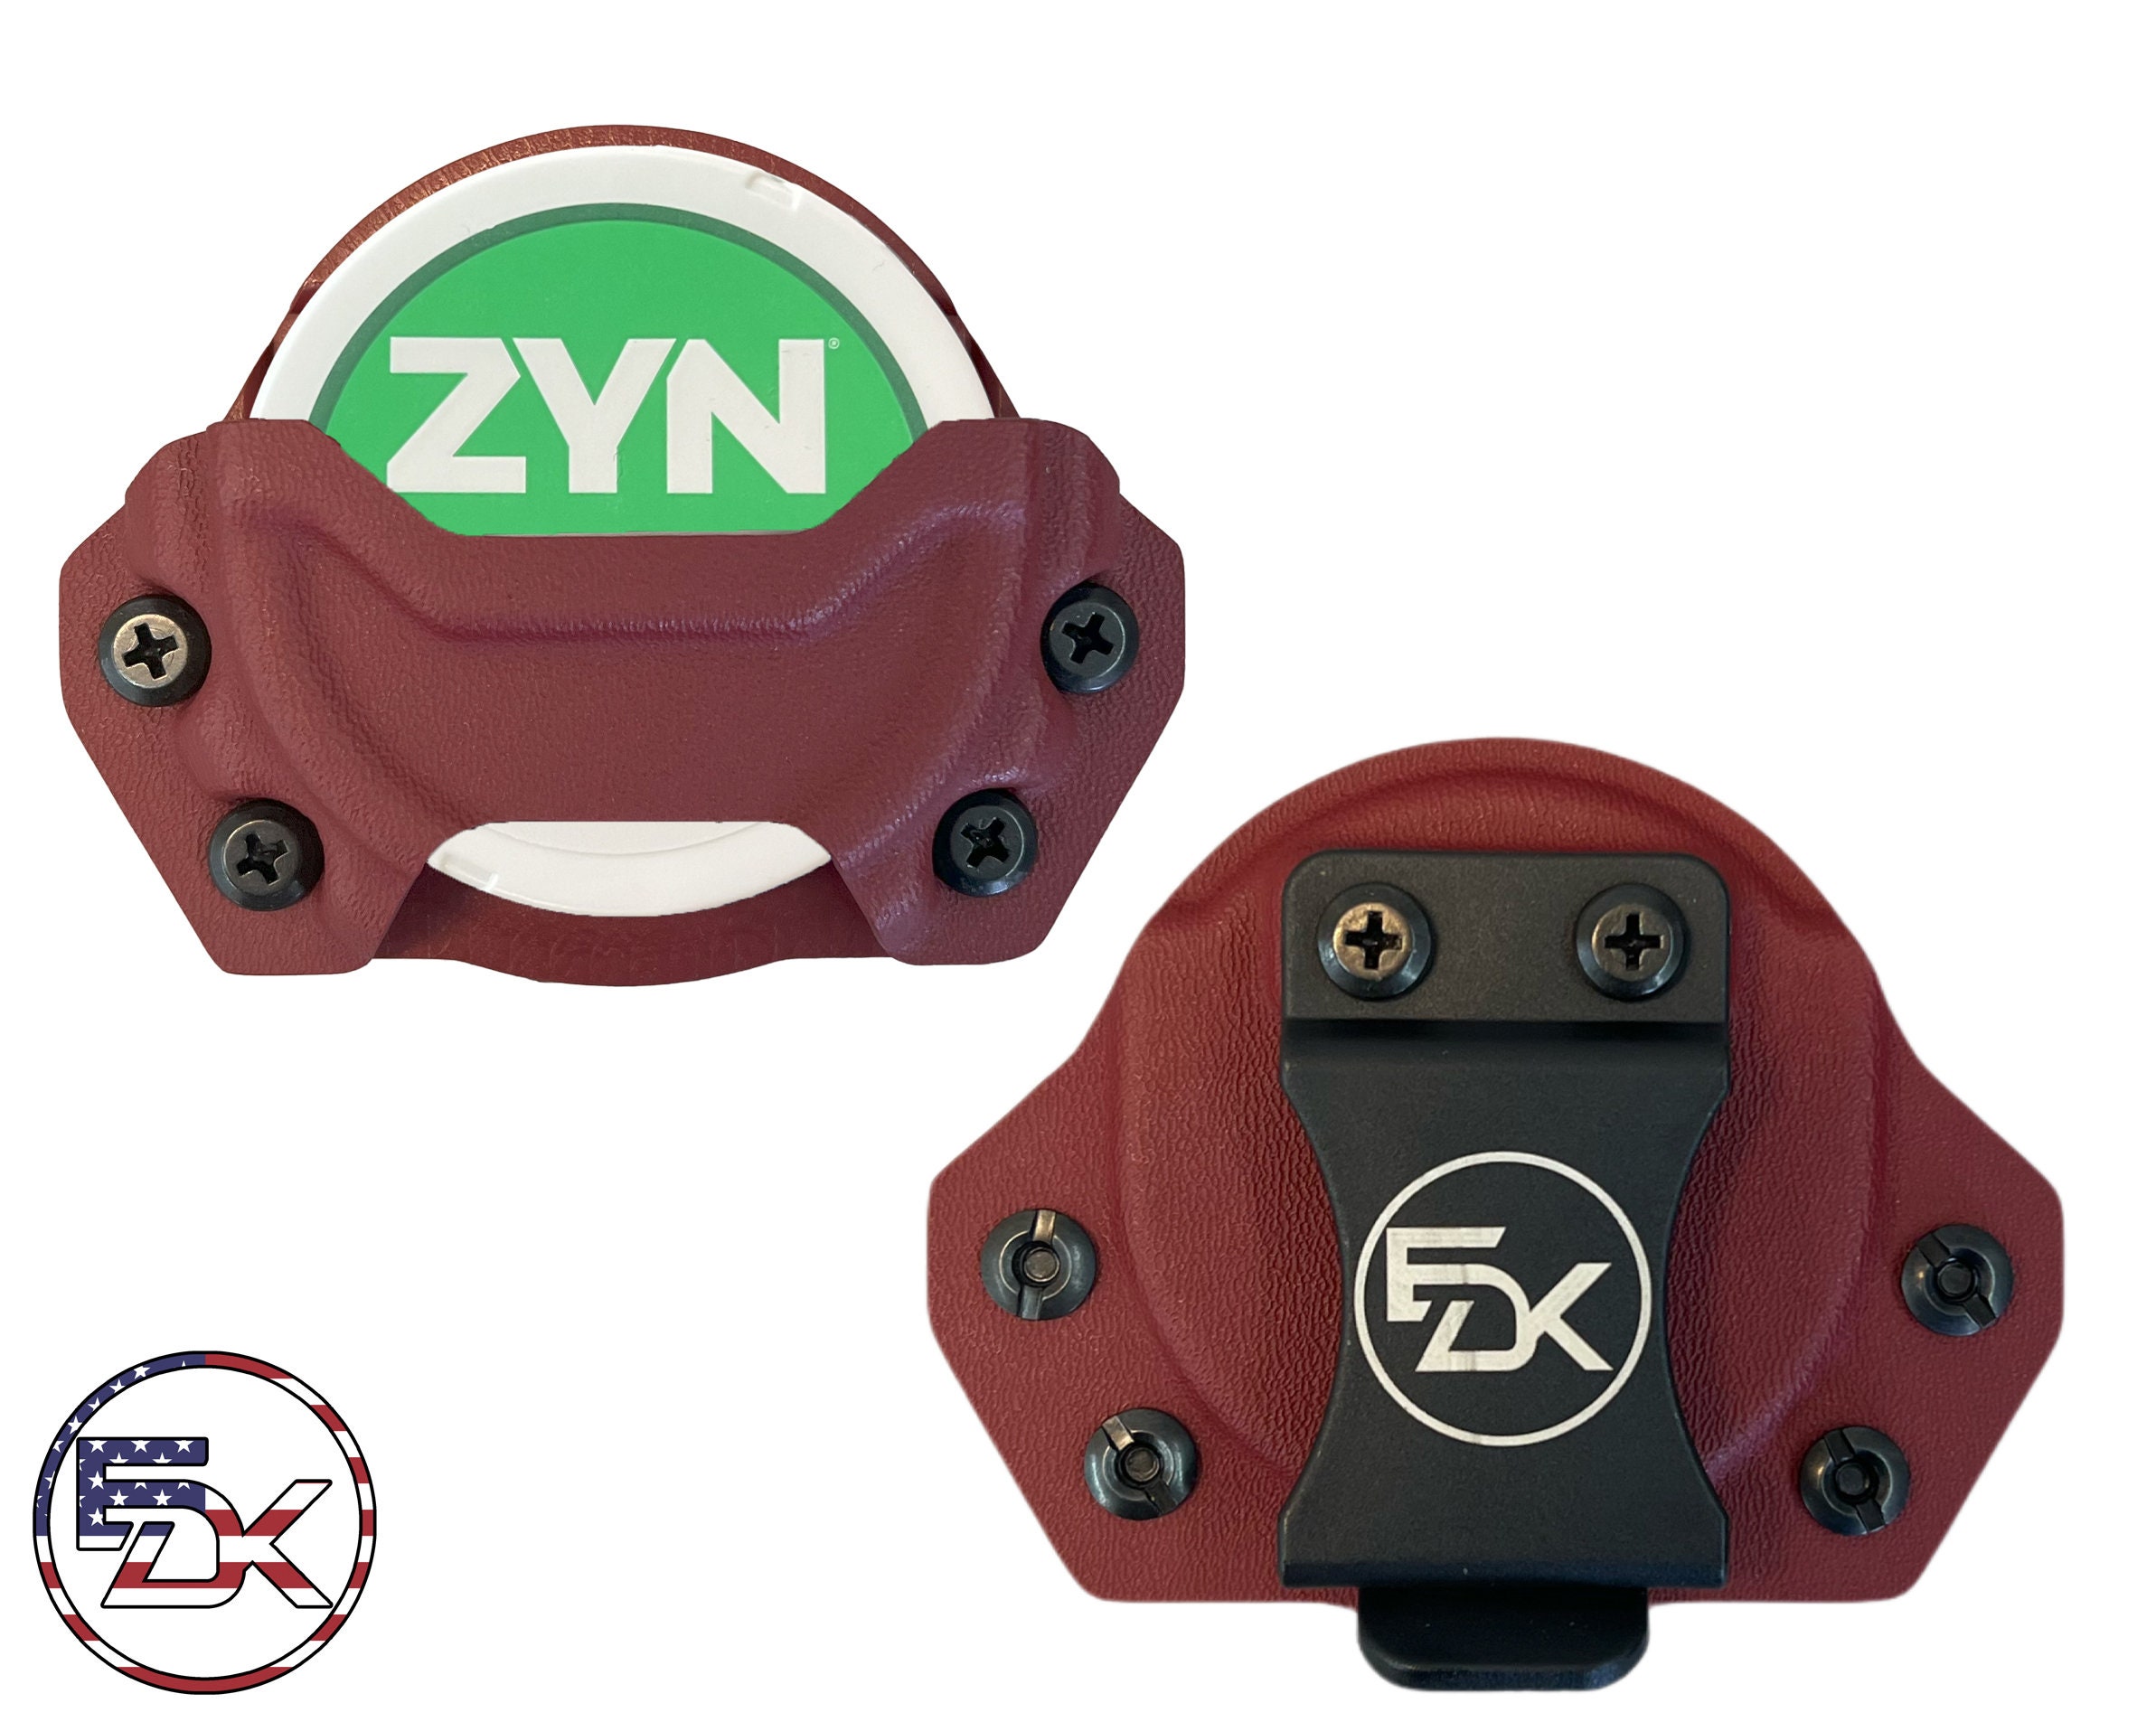 I designed my own zyn holster with universal clip mounts. I've been selling  them to students on campus. : r/3Dprinting